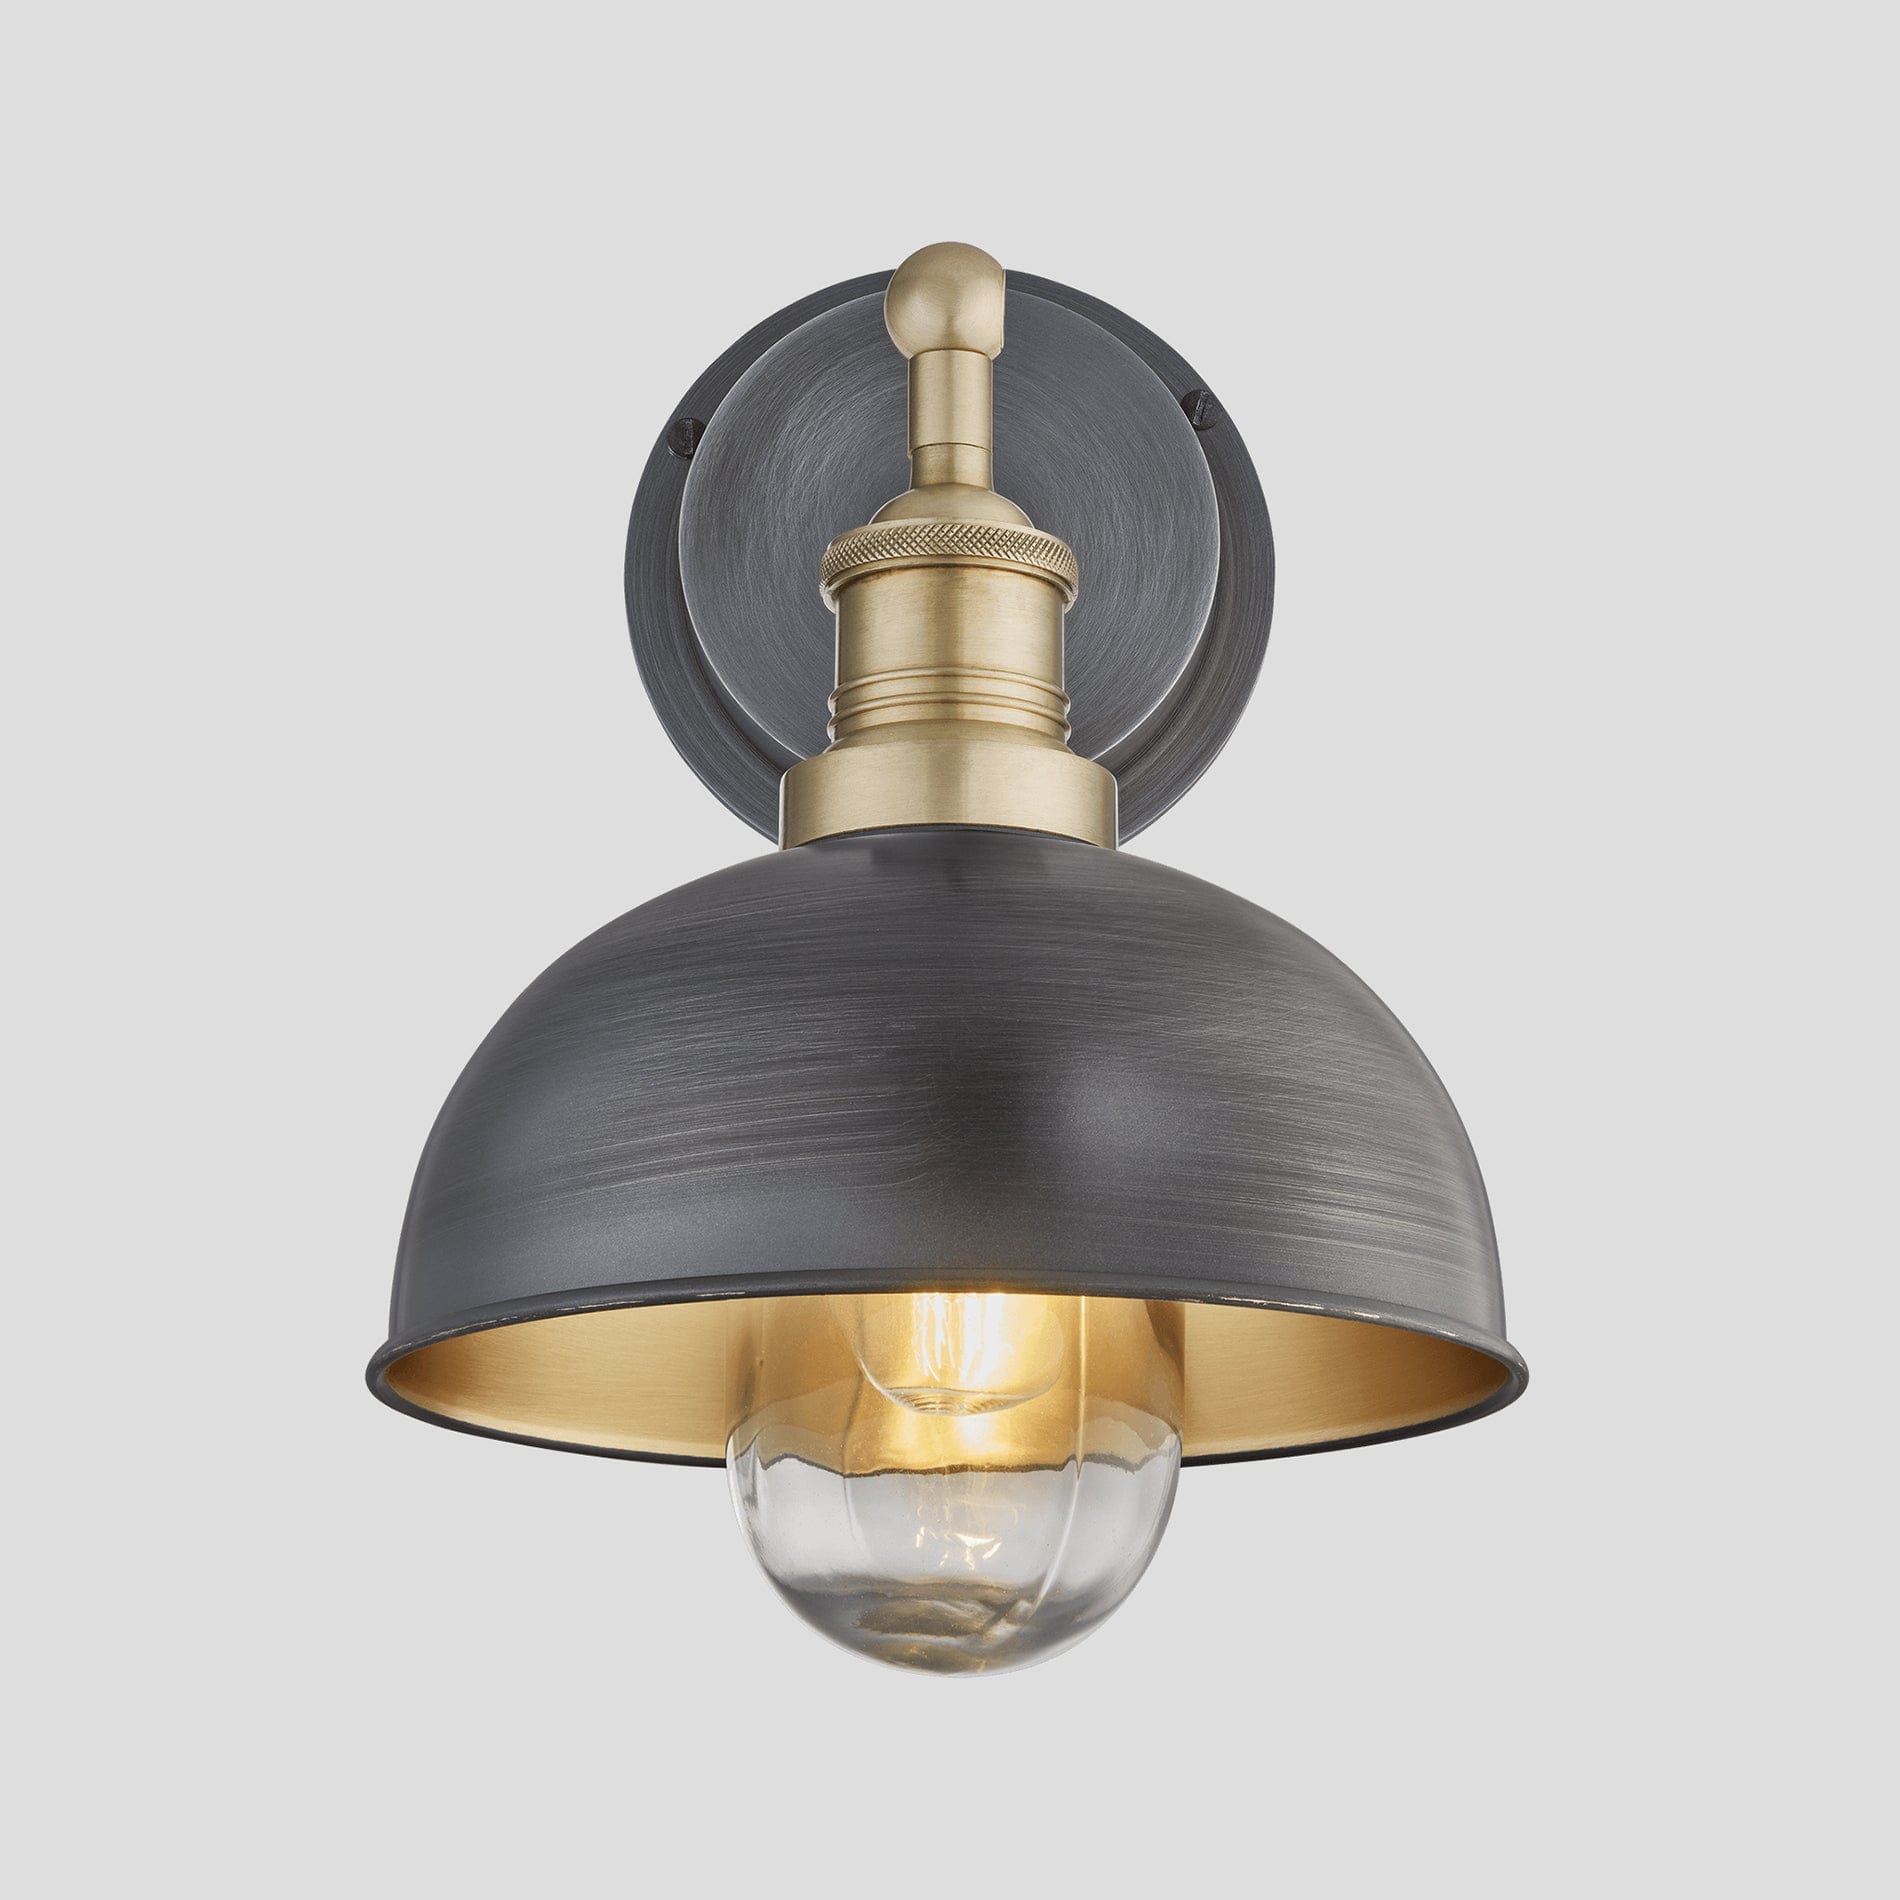 Brooklyn Outdoor & Bathroom Dome Wall Light - 8 Inch - Pewter & Brass Industville BR-IP65-DWL8-BP-BH